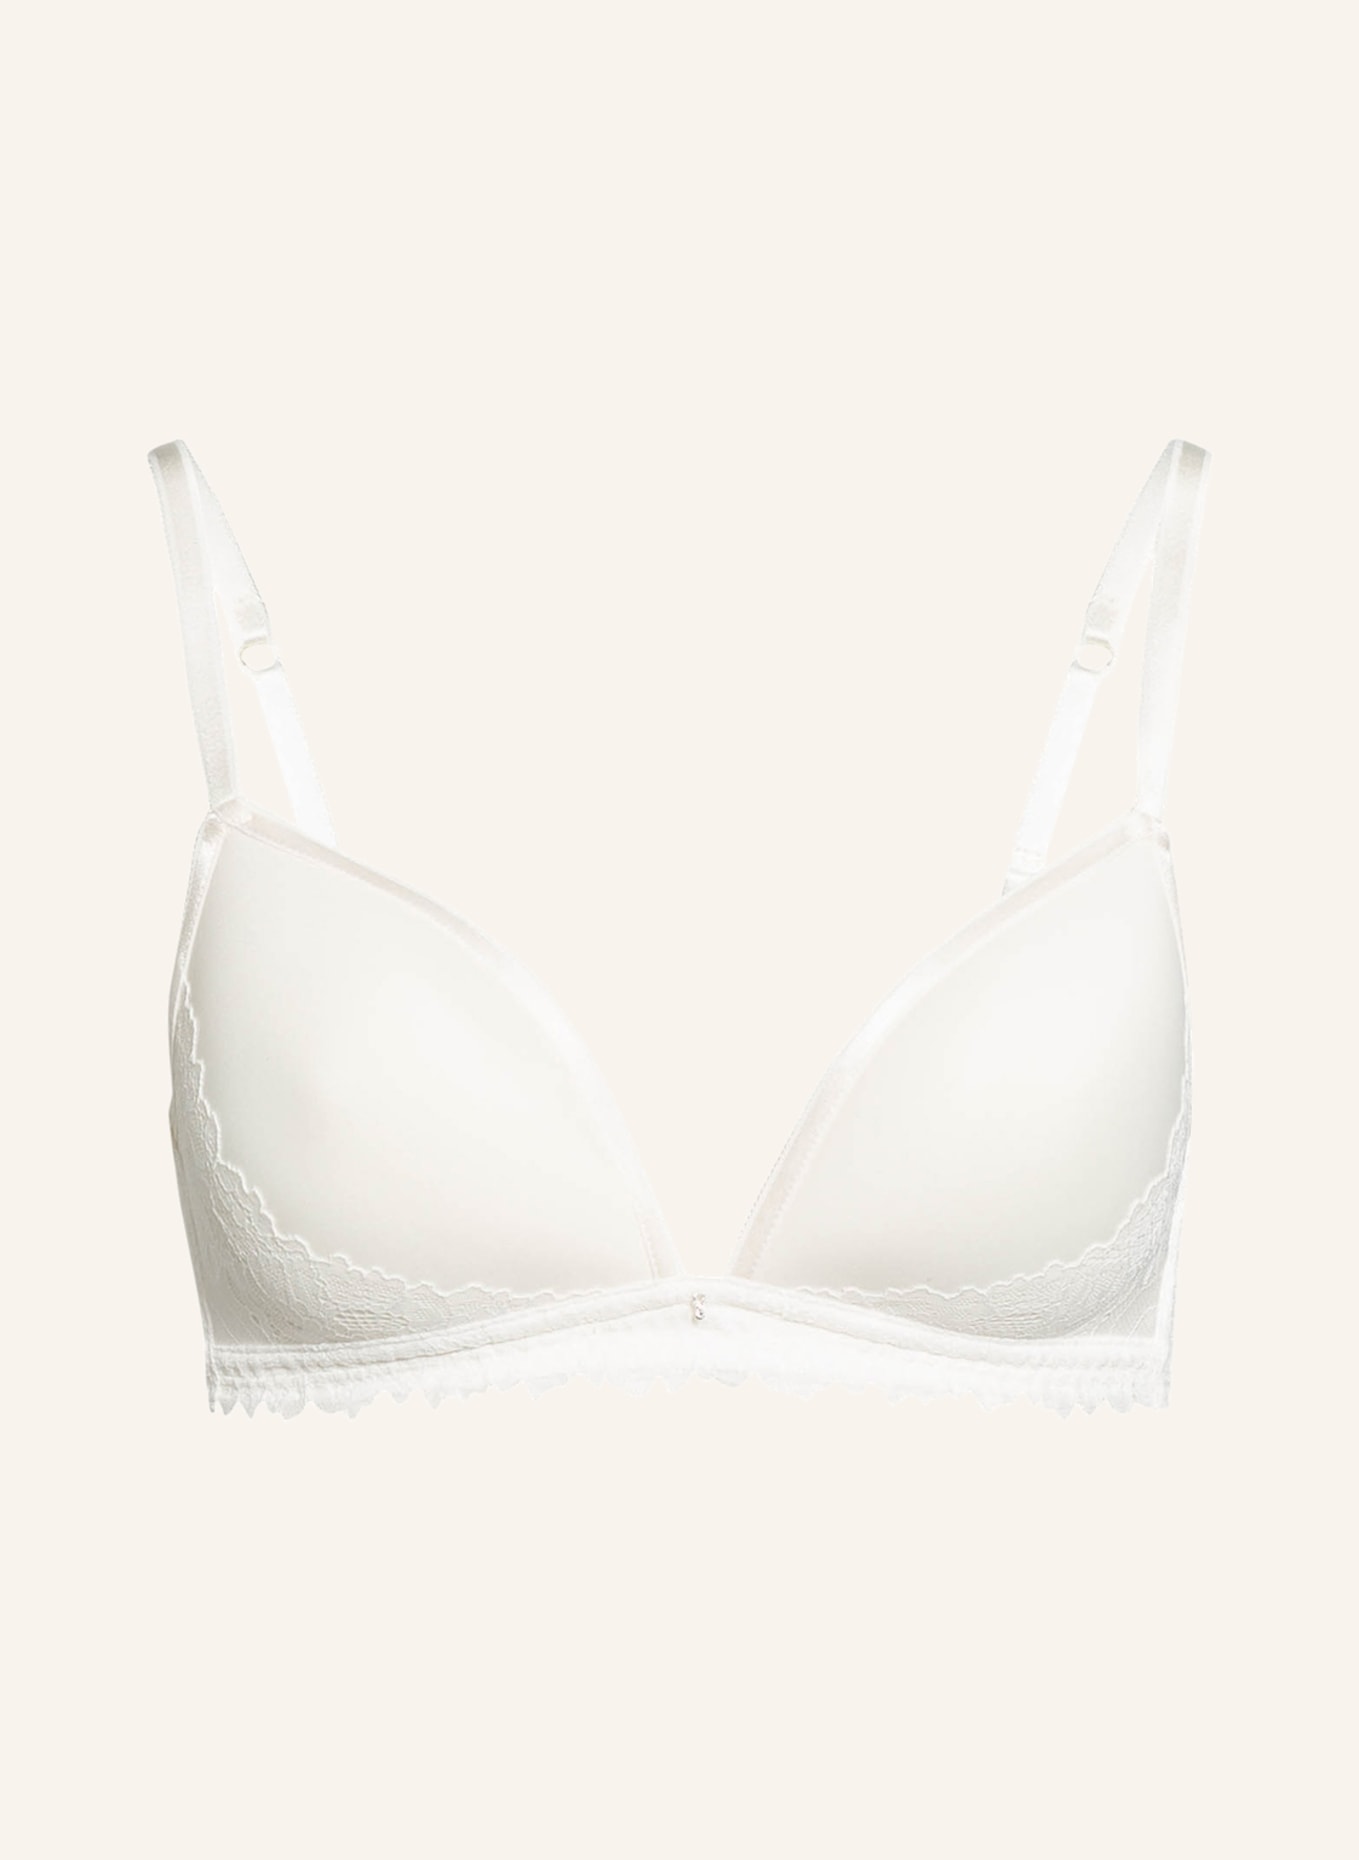 Spacer bra, Full Cup Serie Luxurious Colour blue